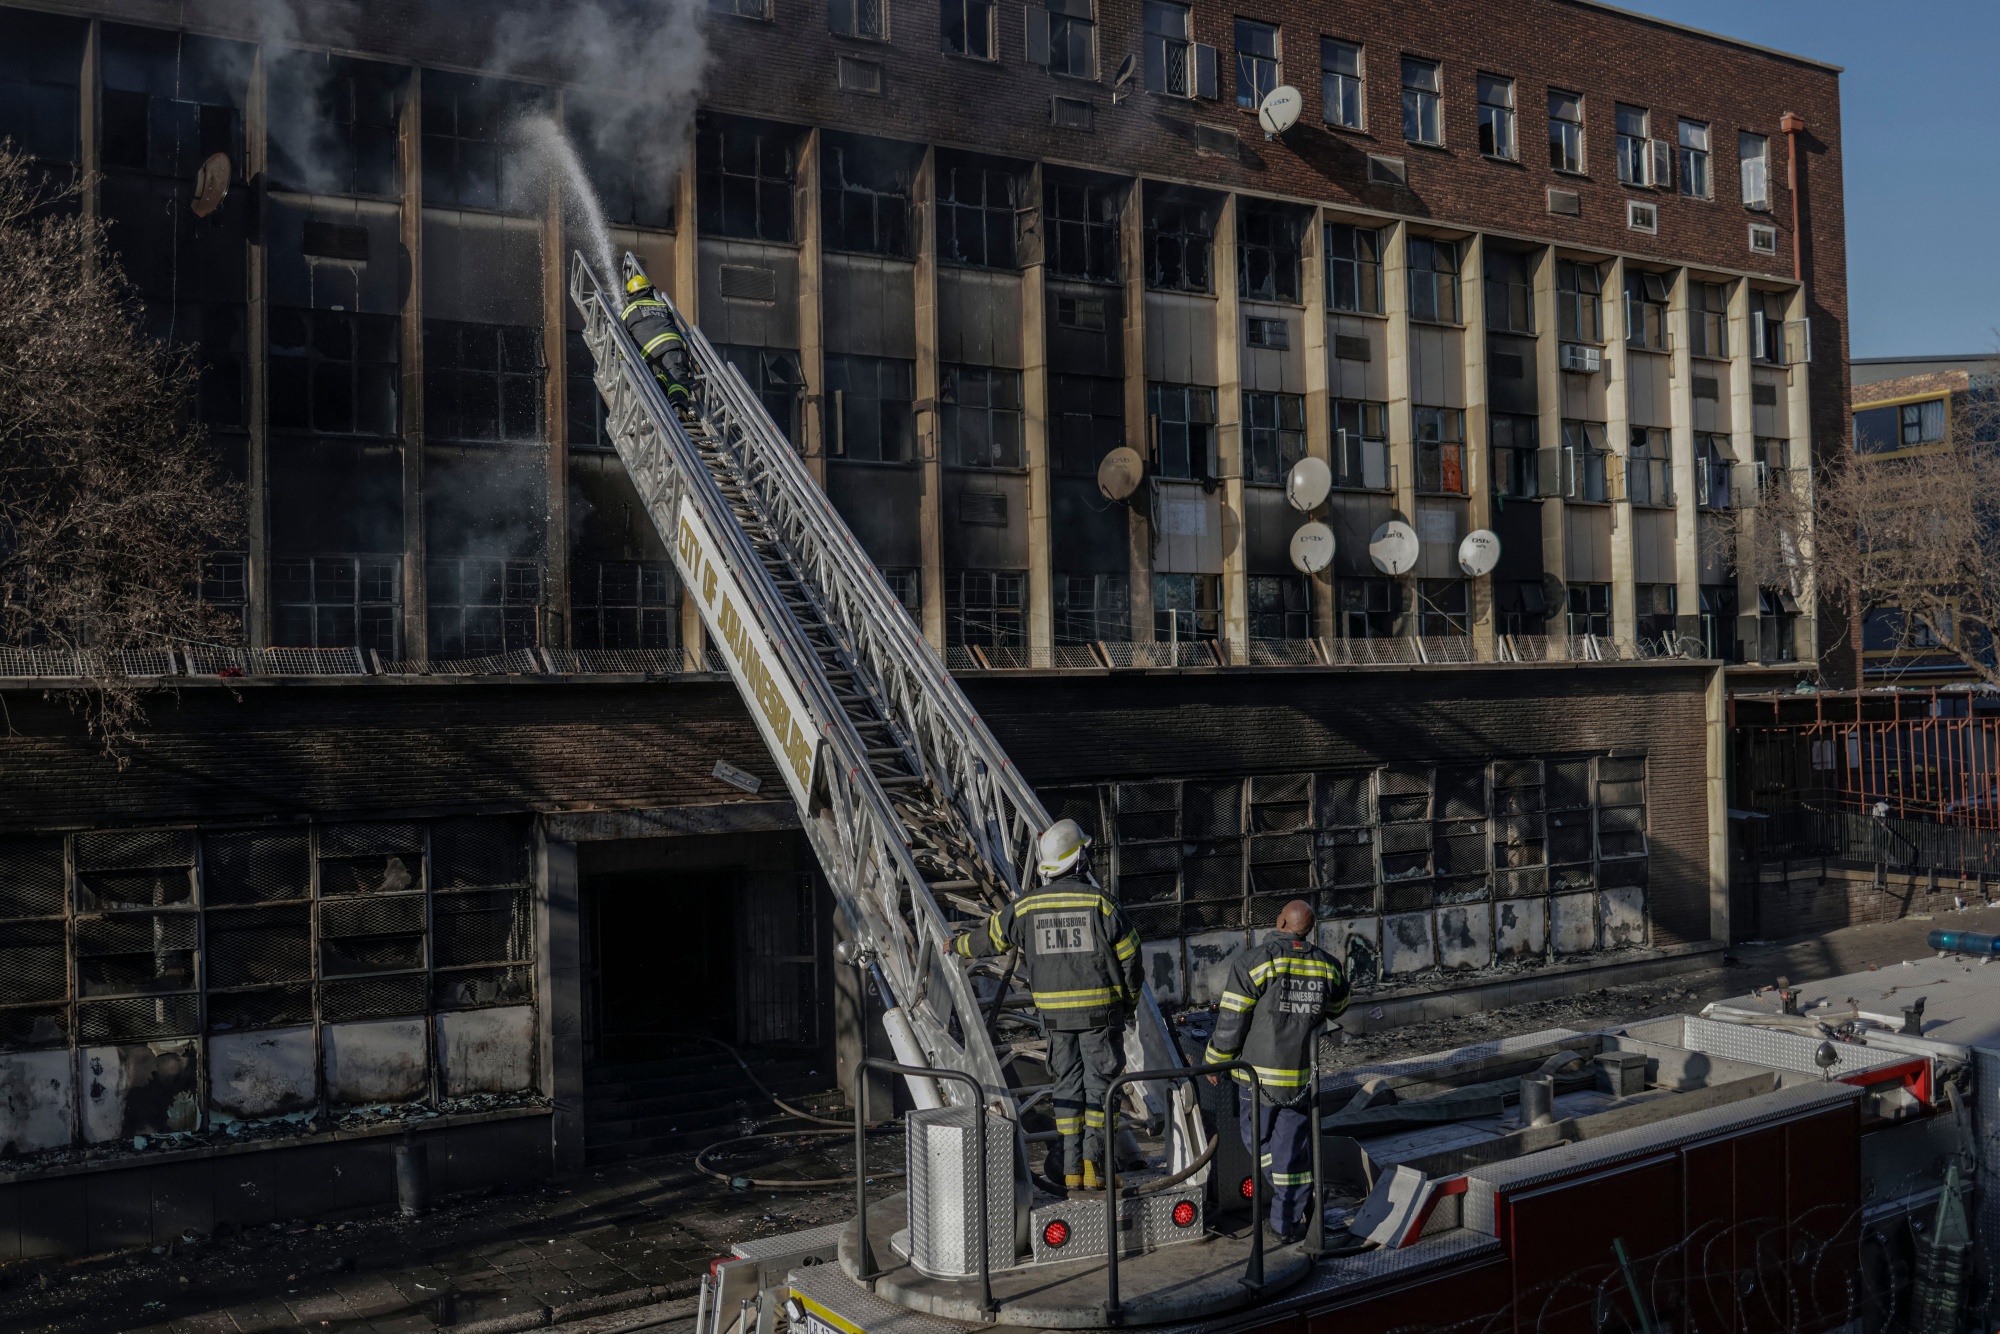 Johannesburg Building Fire Kills at Least 73 People in South Africa ...